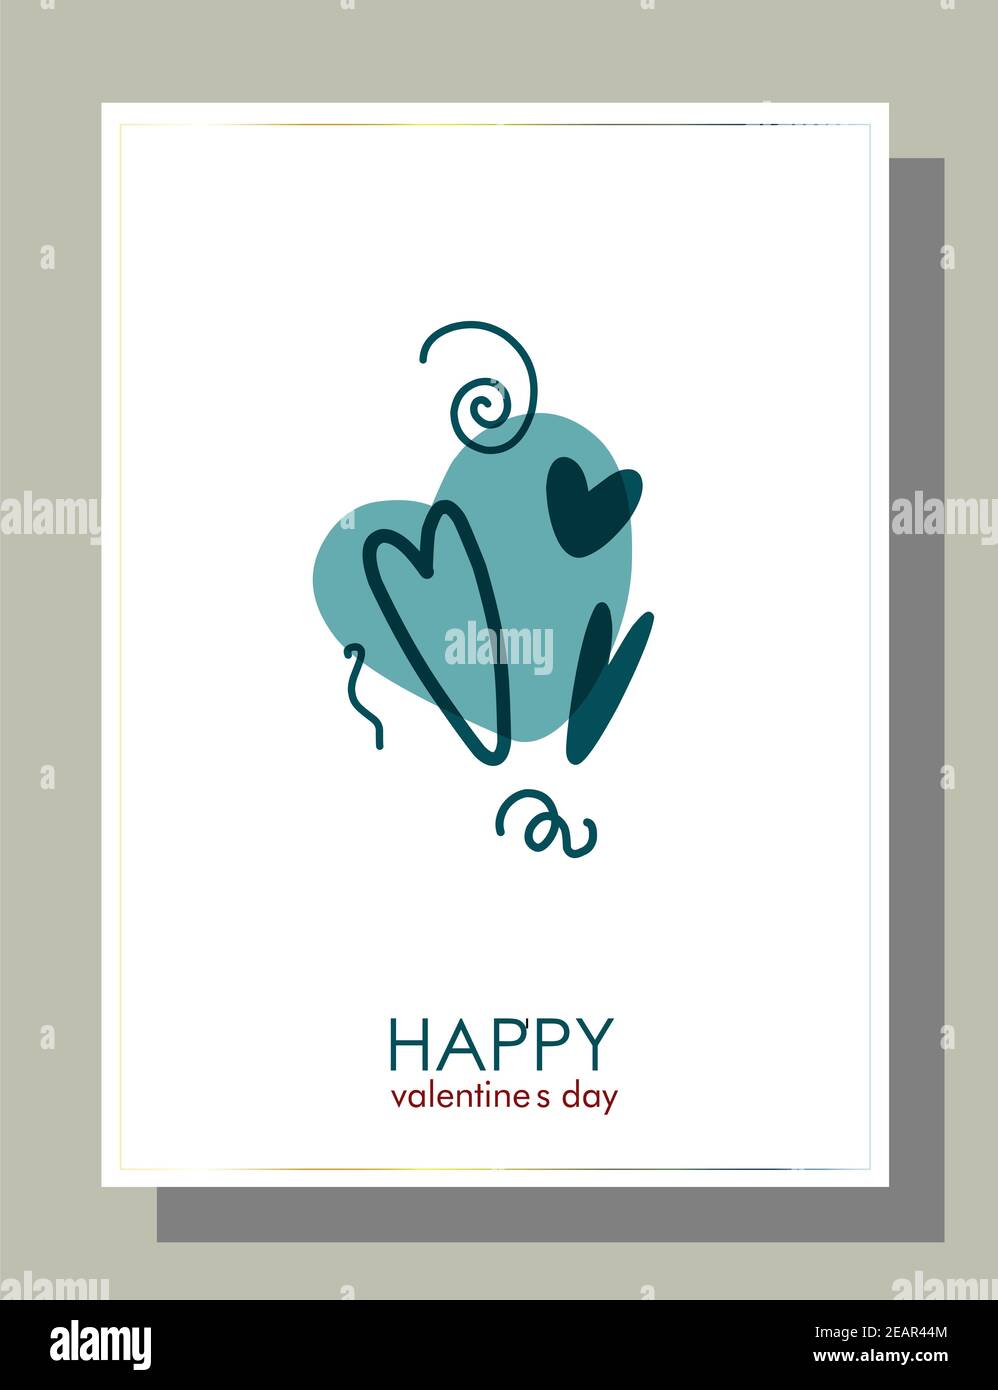 Abstract invitation. Holiday greeting card. Trendy geometric background. Line style vector. Abstract love symbol. Holiday concept. Modern trendy poster. Business concept Stock Photo